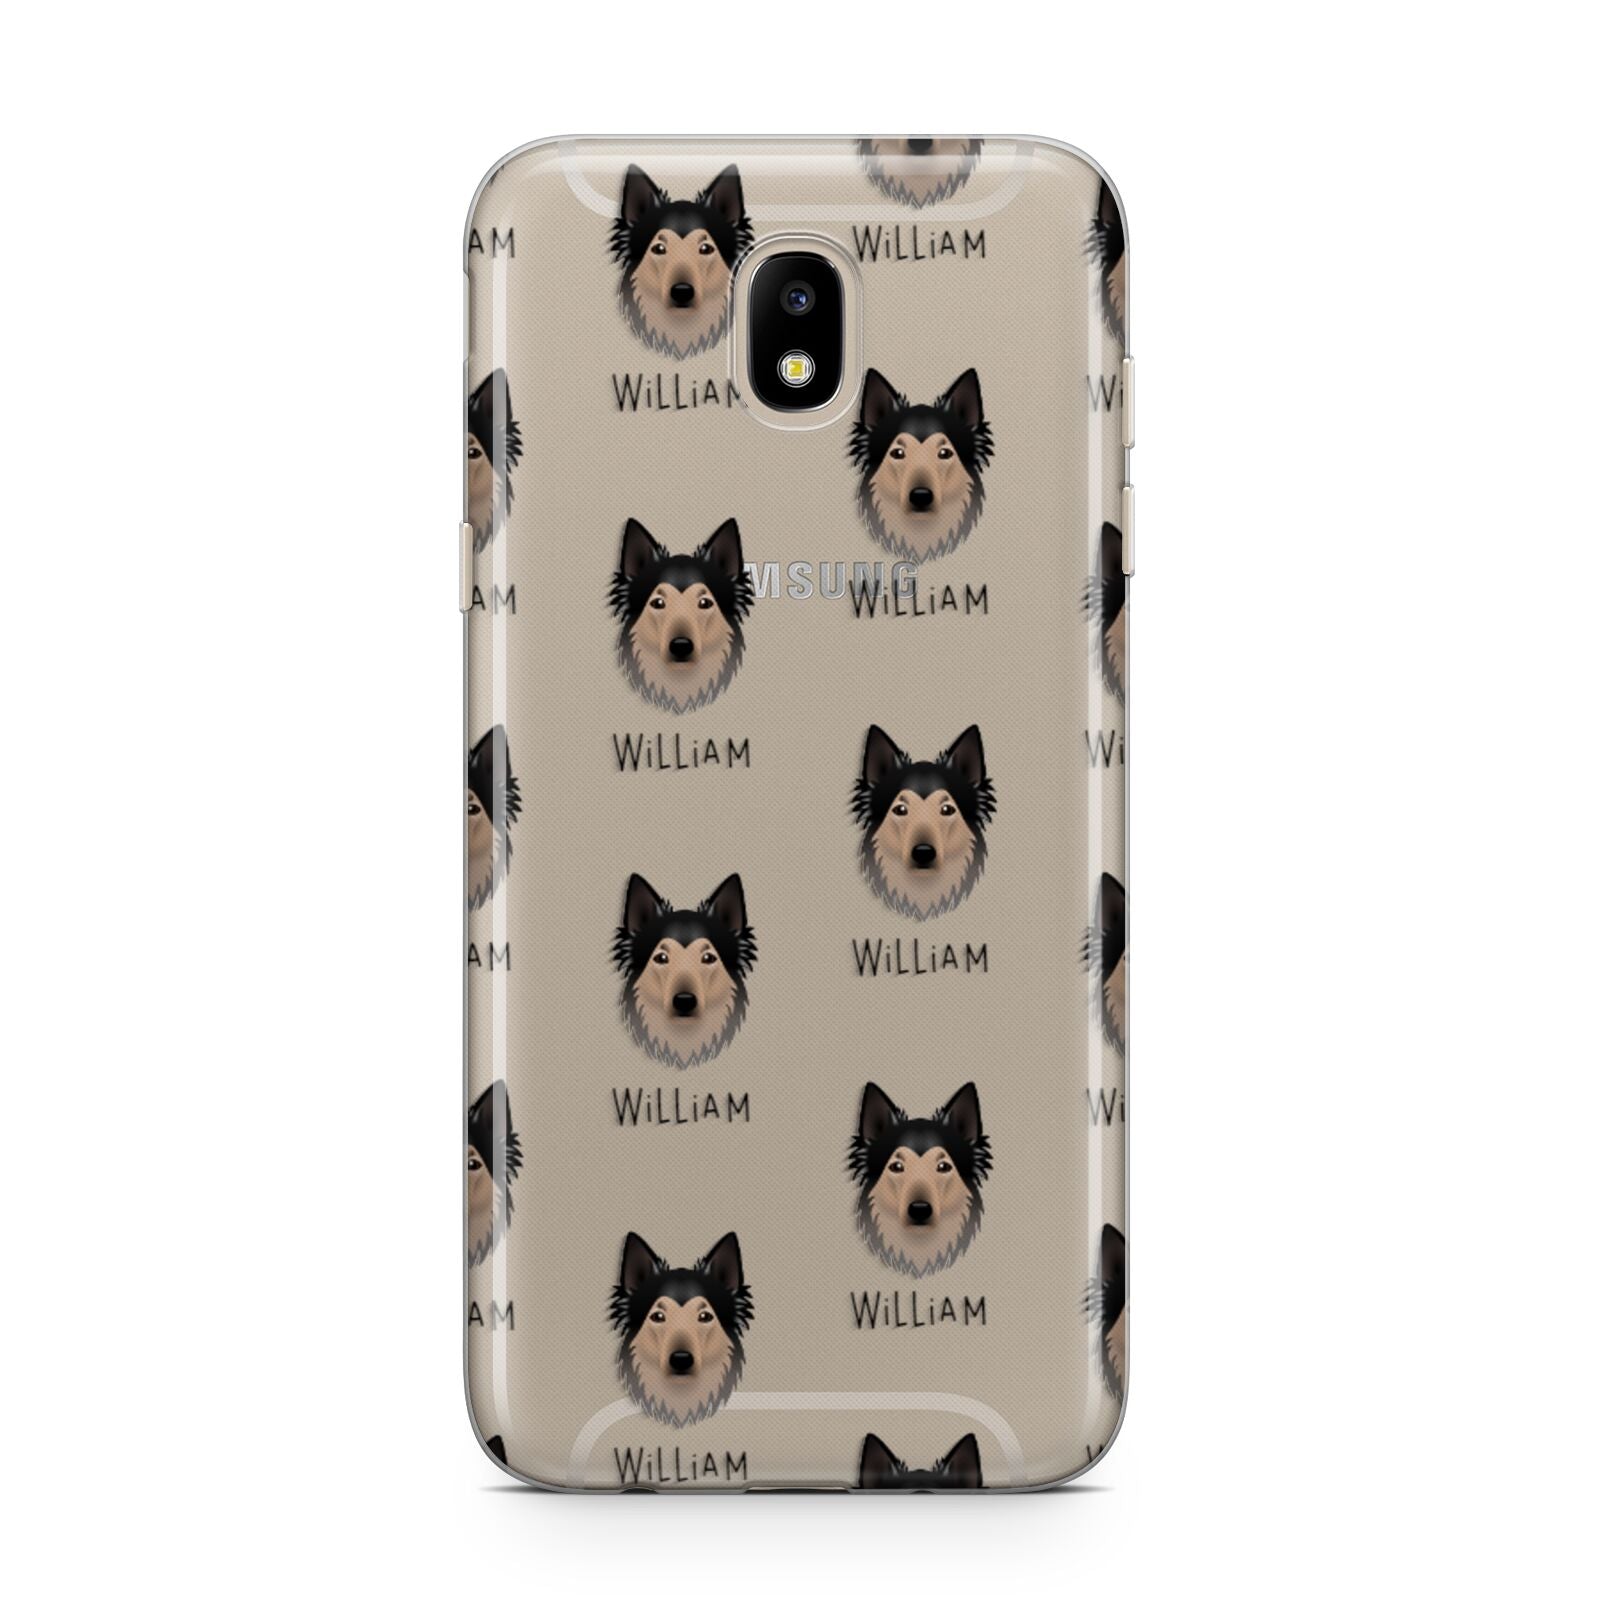 Shollie Icon with Name Samsung J5 2017 Case